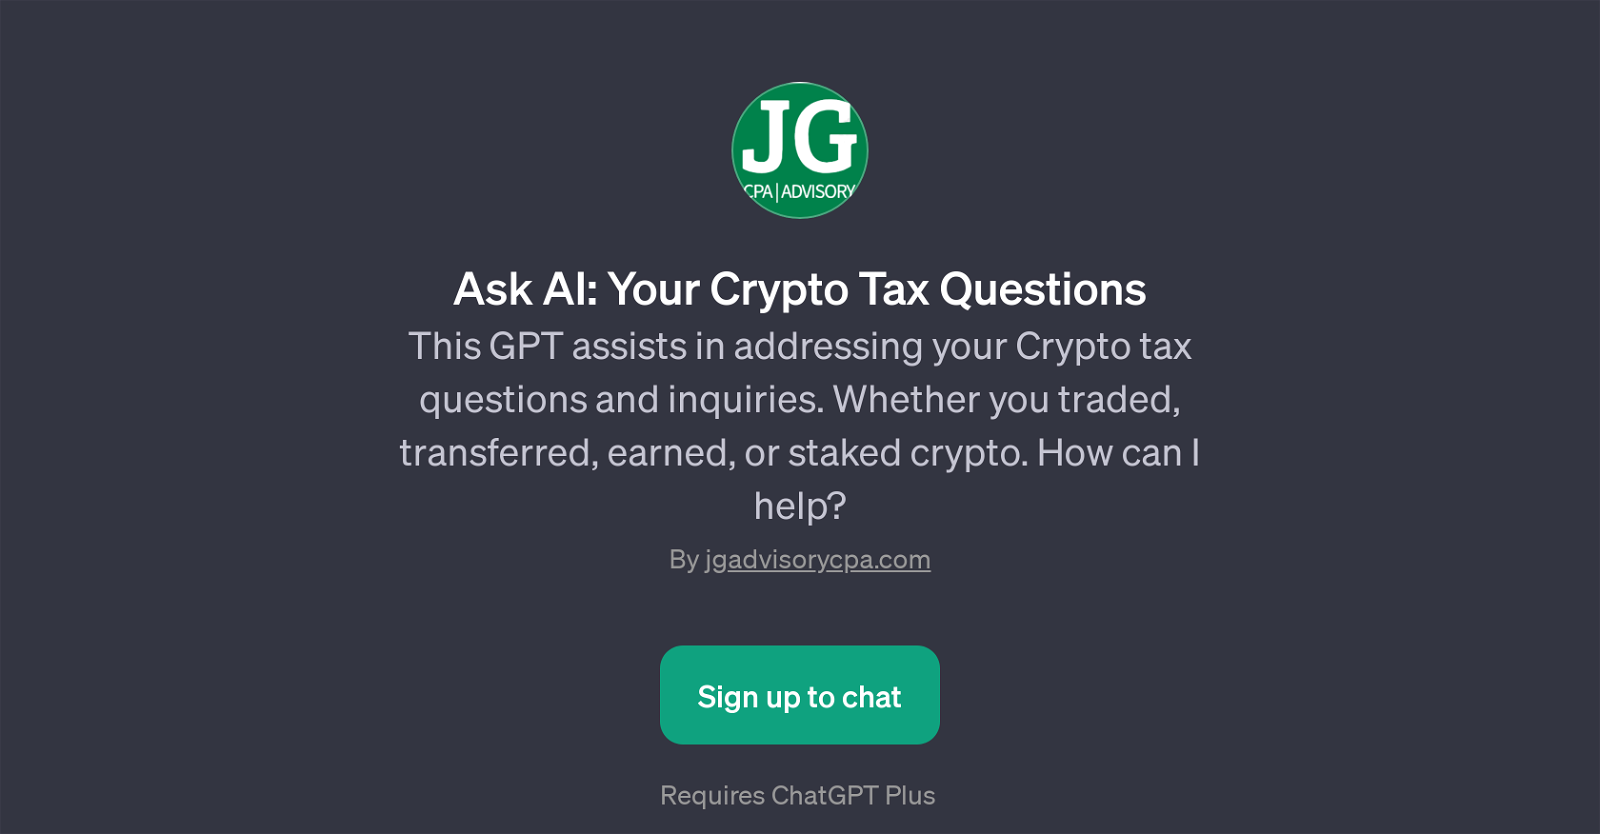 Ask AI: Your Crypto Tax Questions website